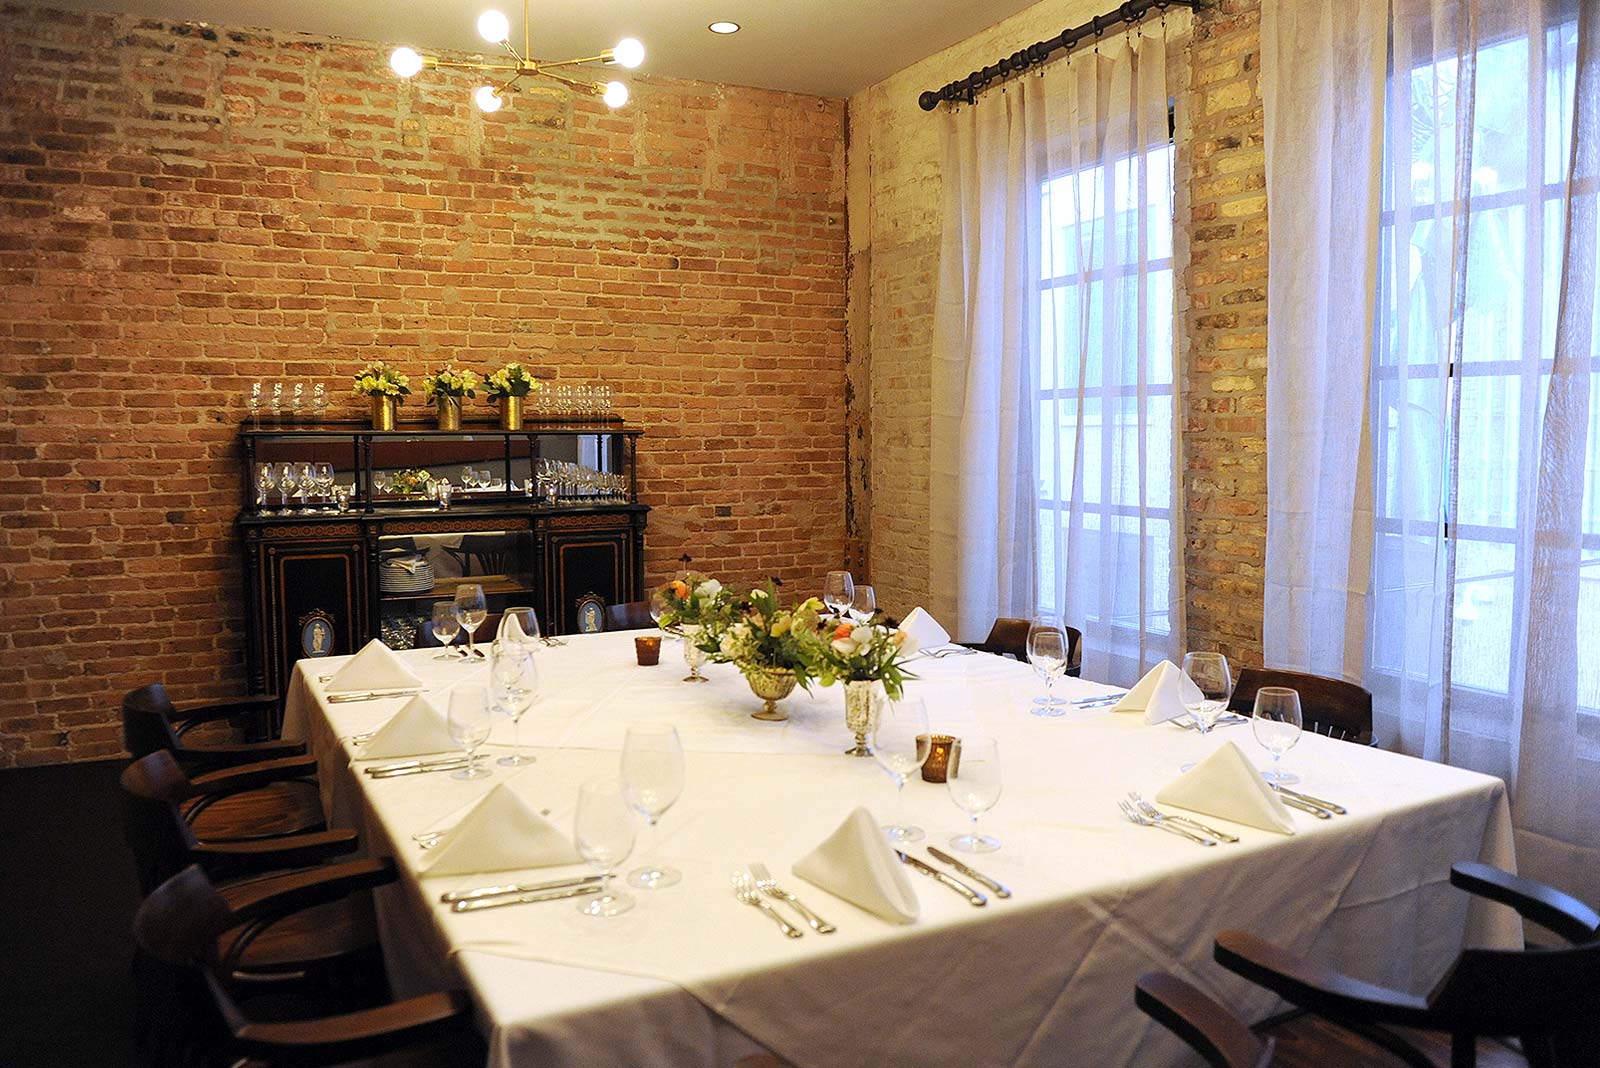 Formento's private dining